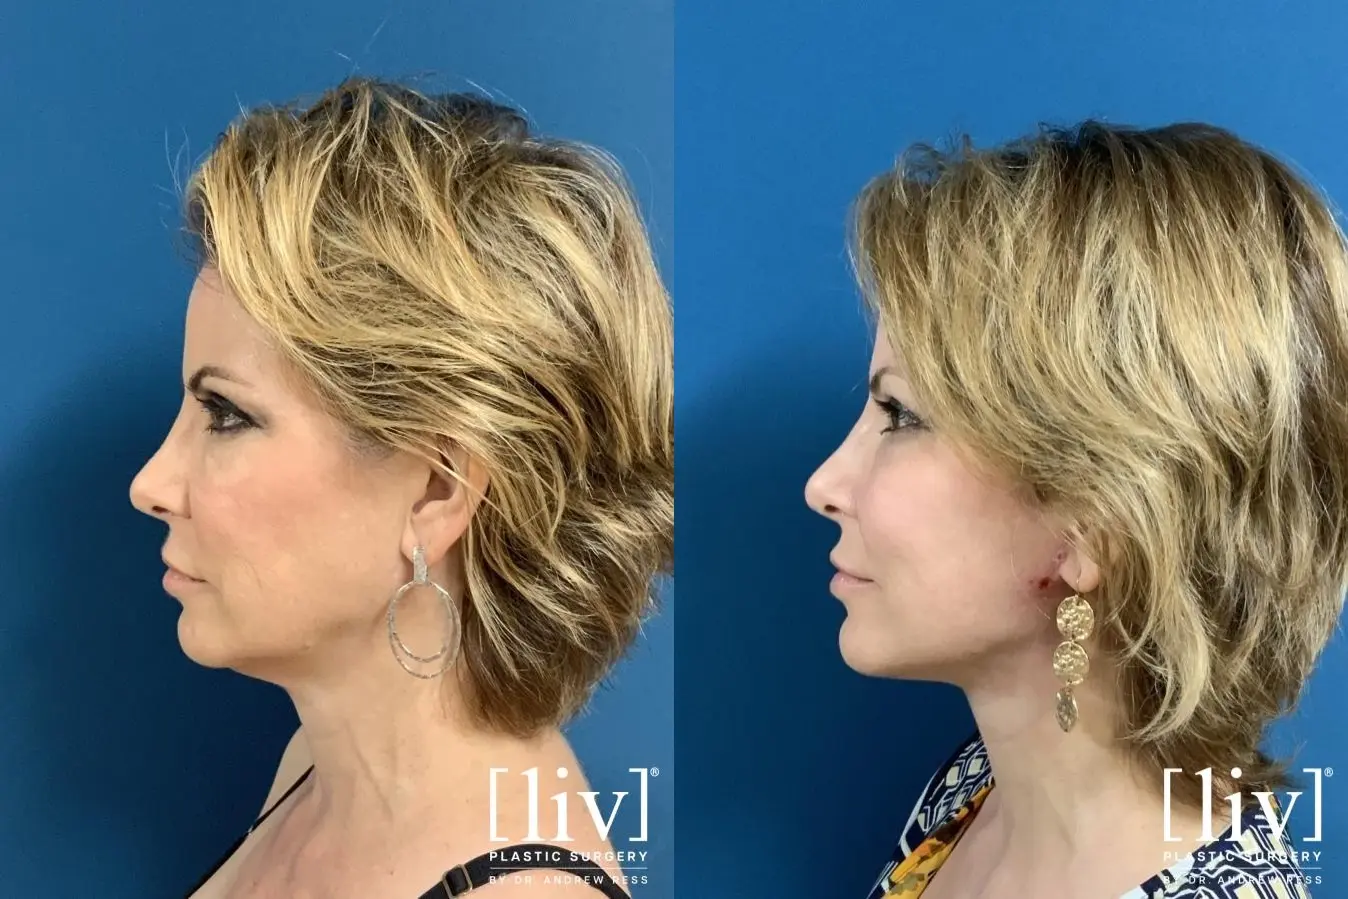 Facelift & Neck Lift: Patient 1 - Before and After 3